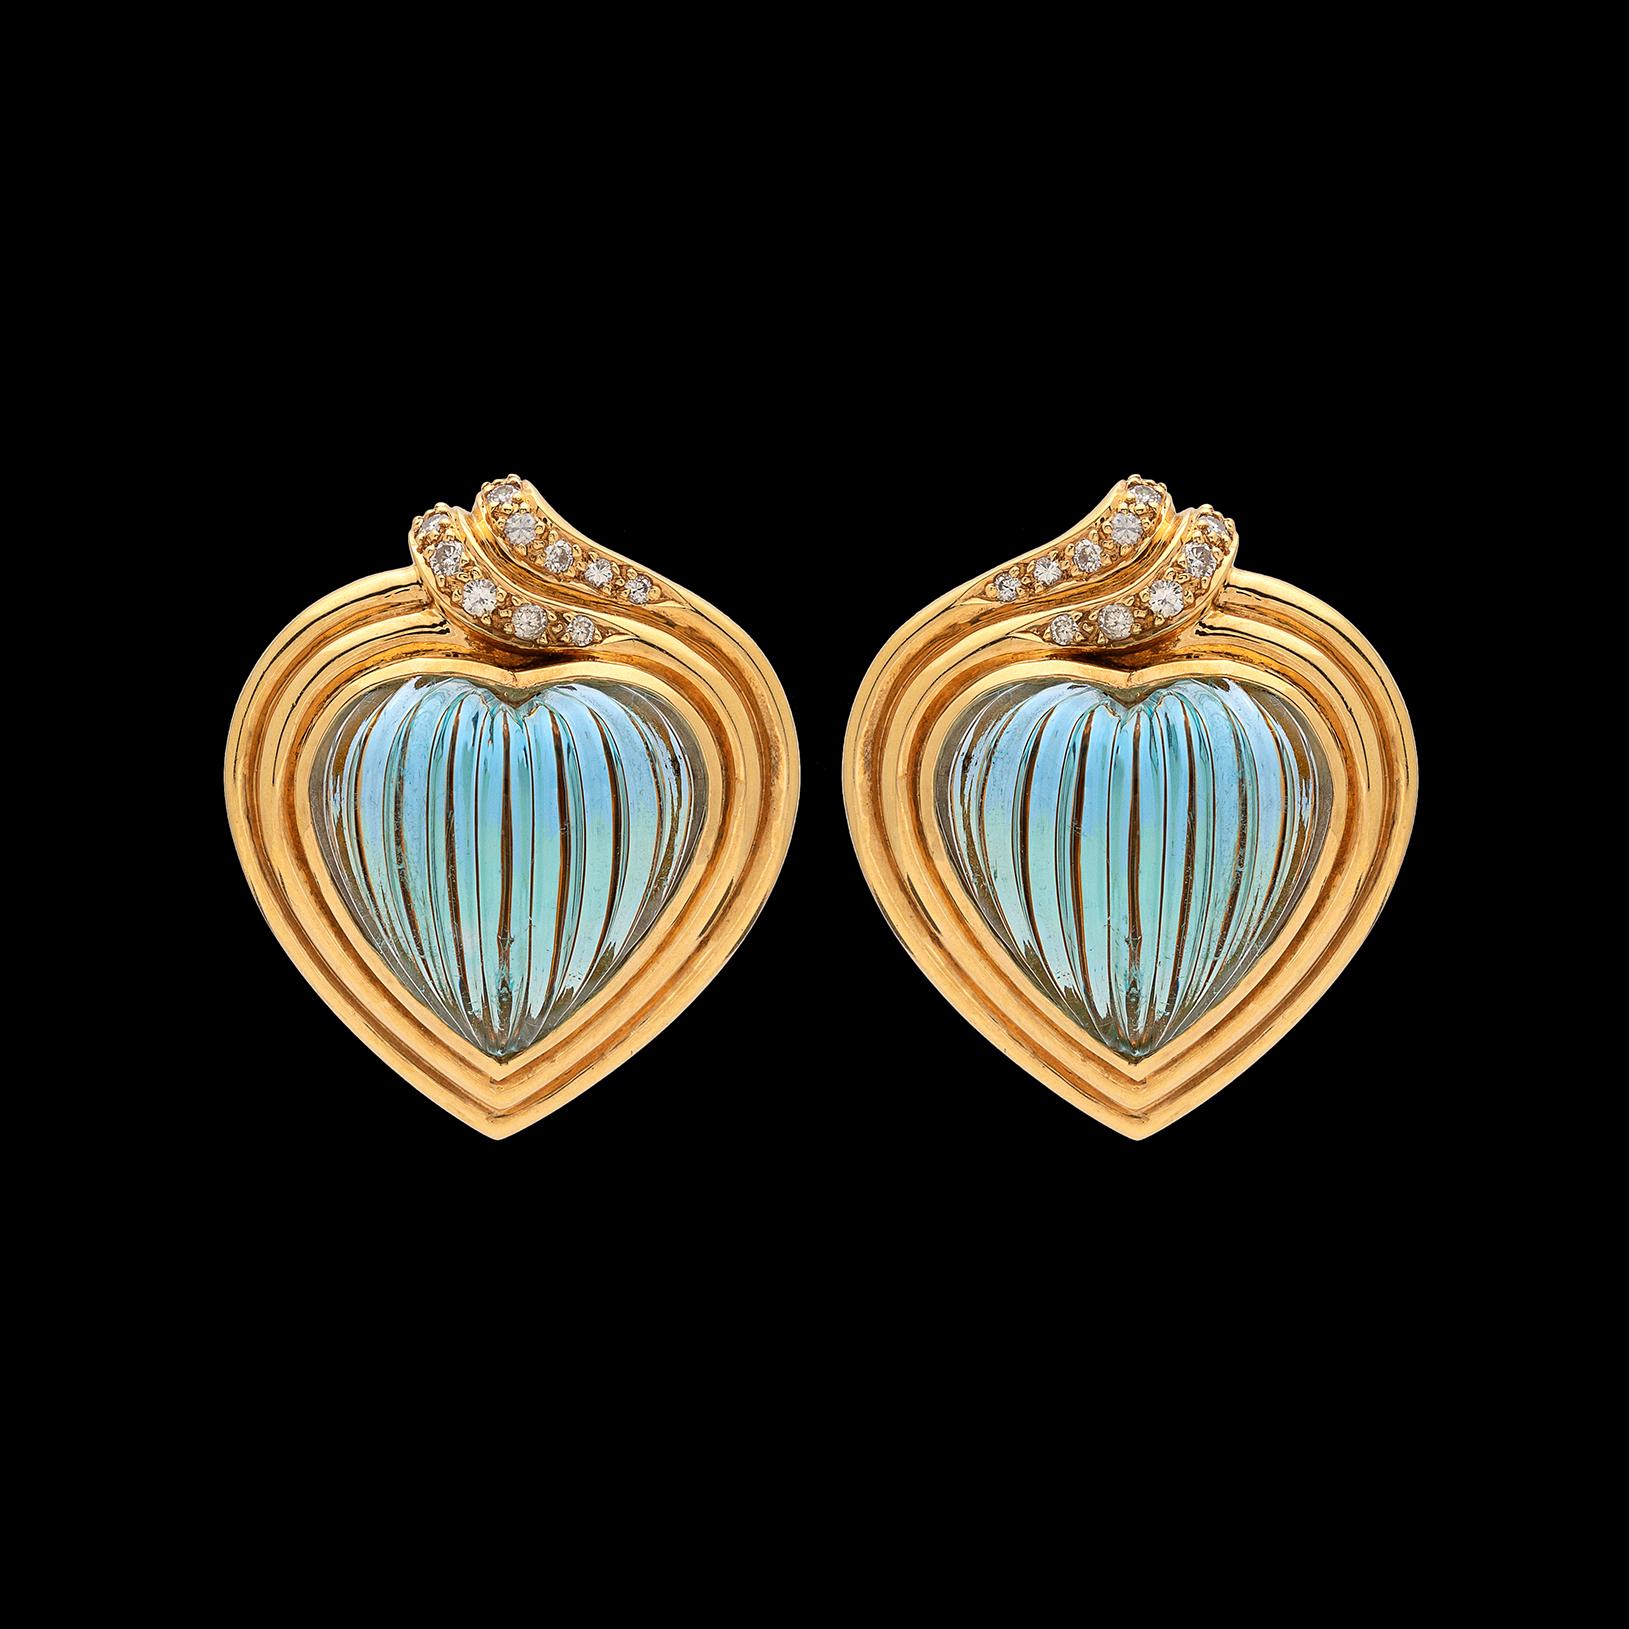 Beautifully made by Spanish brand Carrera y Carrera, these 18k yellow gold earrings feature two carved and fluted heart-shaped aquamarines, together weighing approximately 22-cts., with double rimmed gold frames and highlighted by 24 round